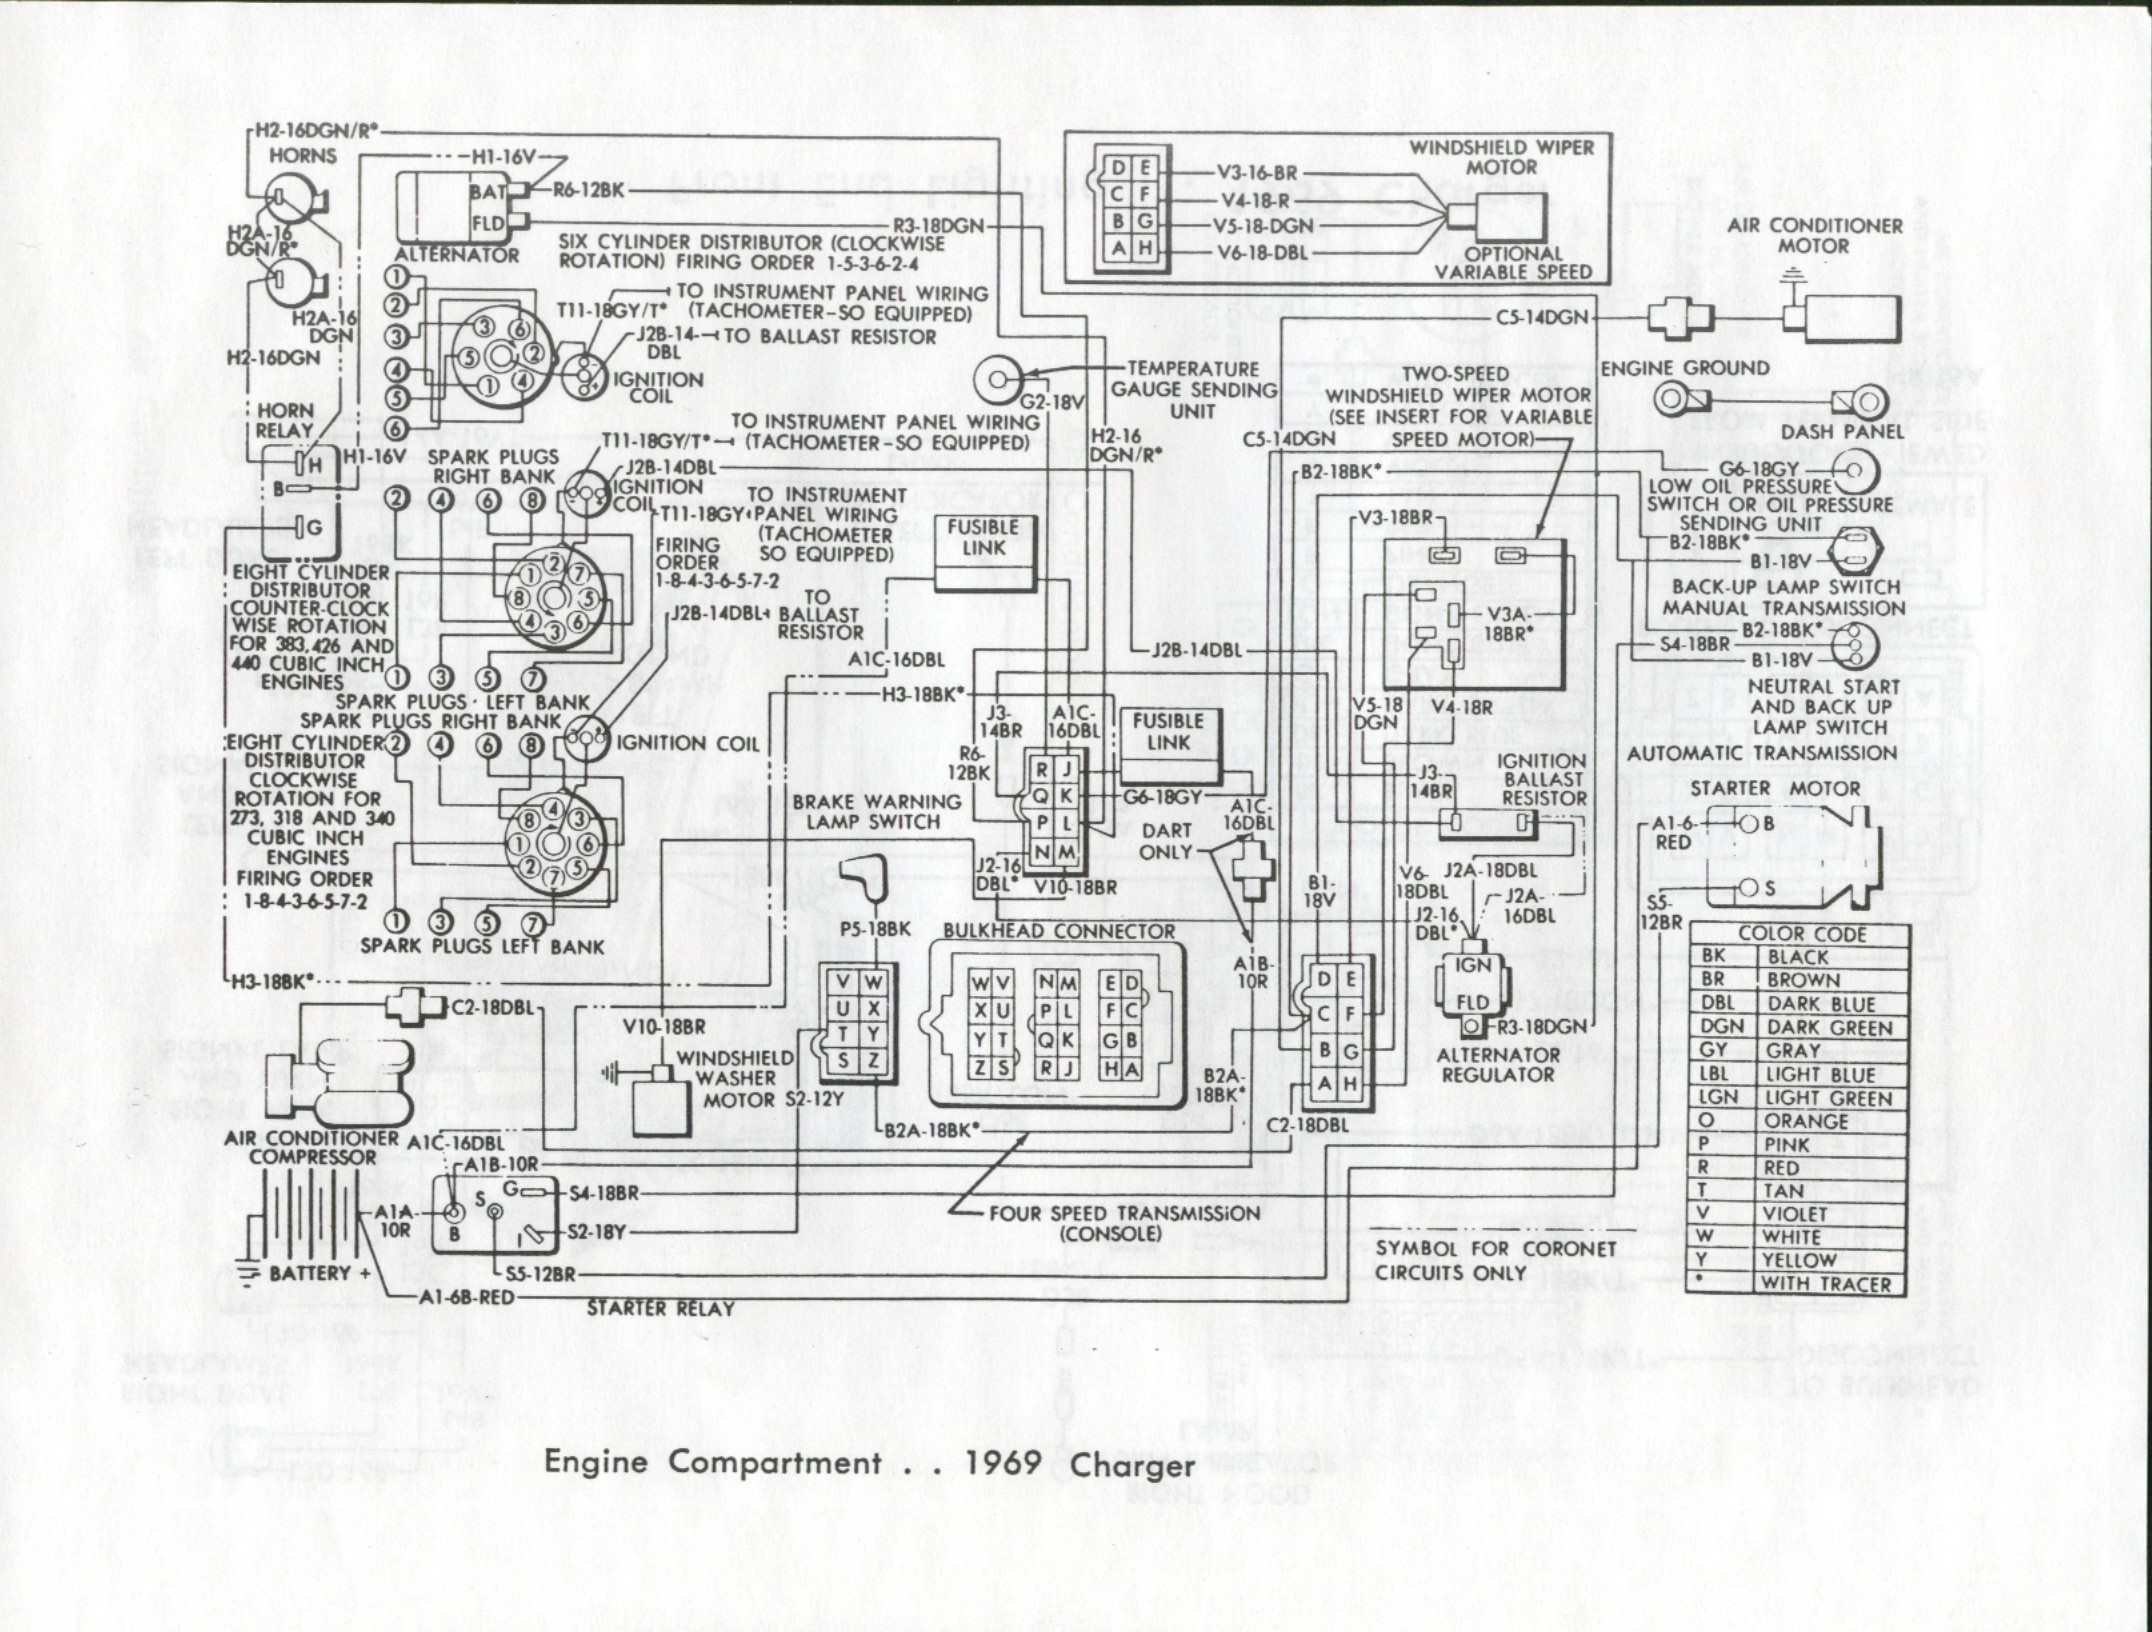 Dodge Charger Wiring Diagram from www.angelfire.com